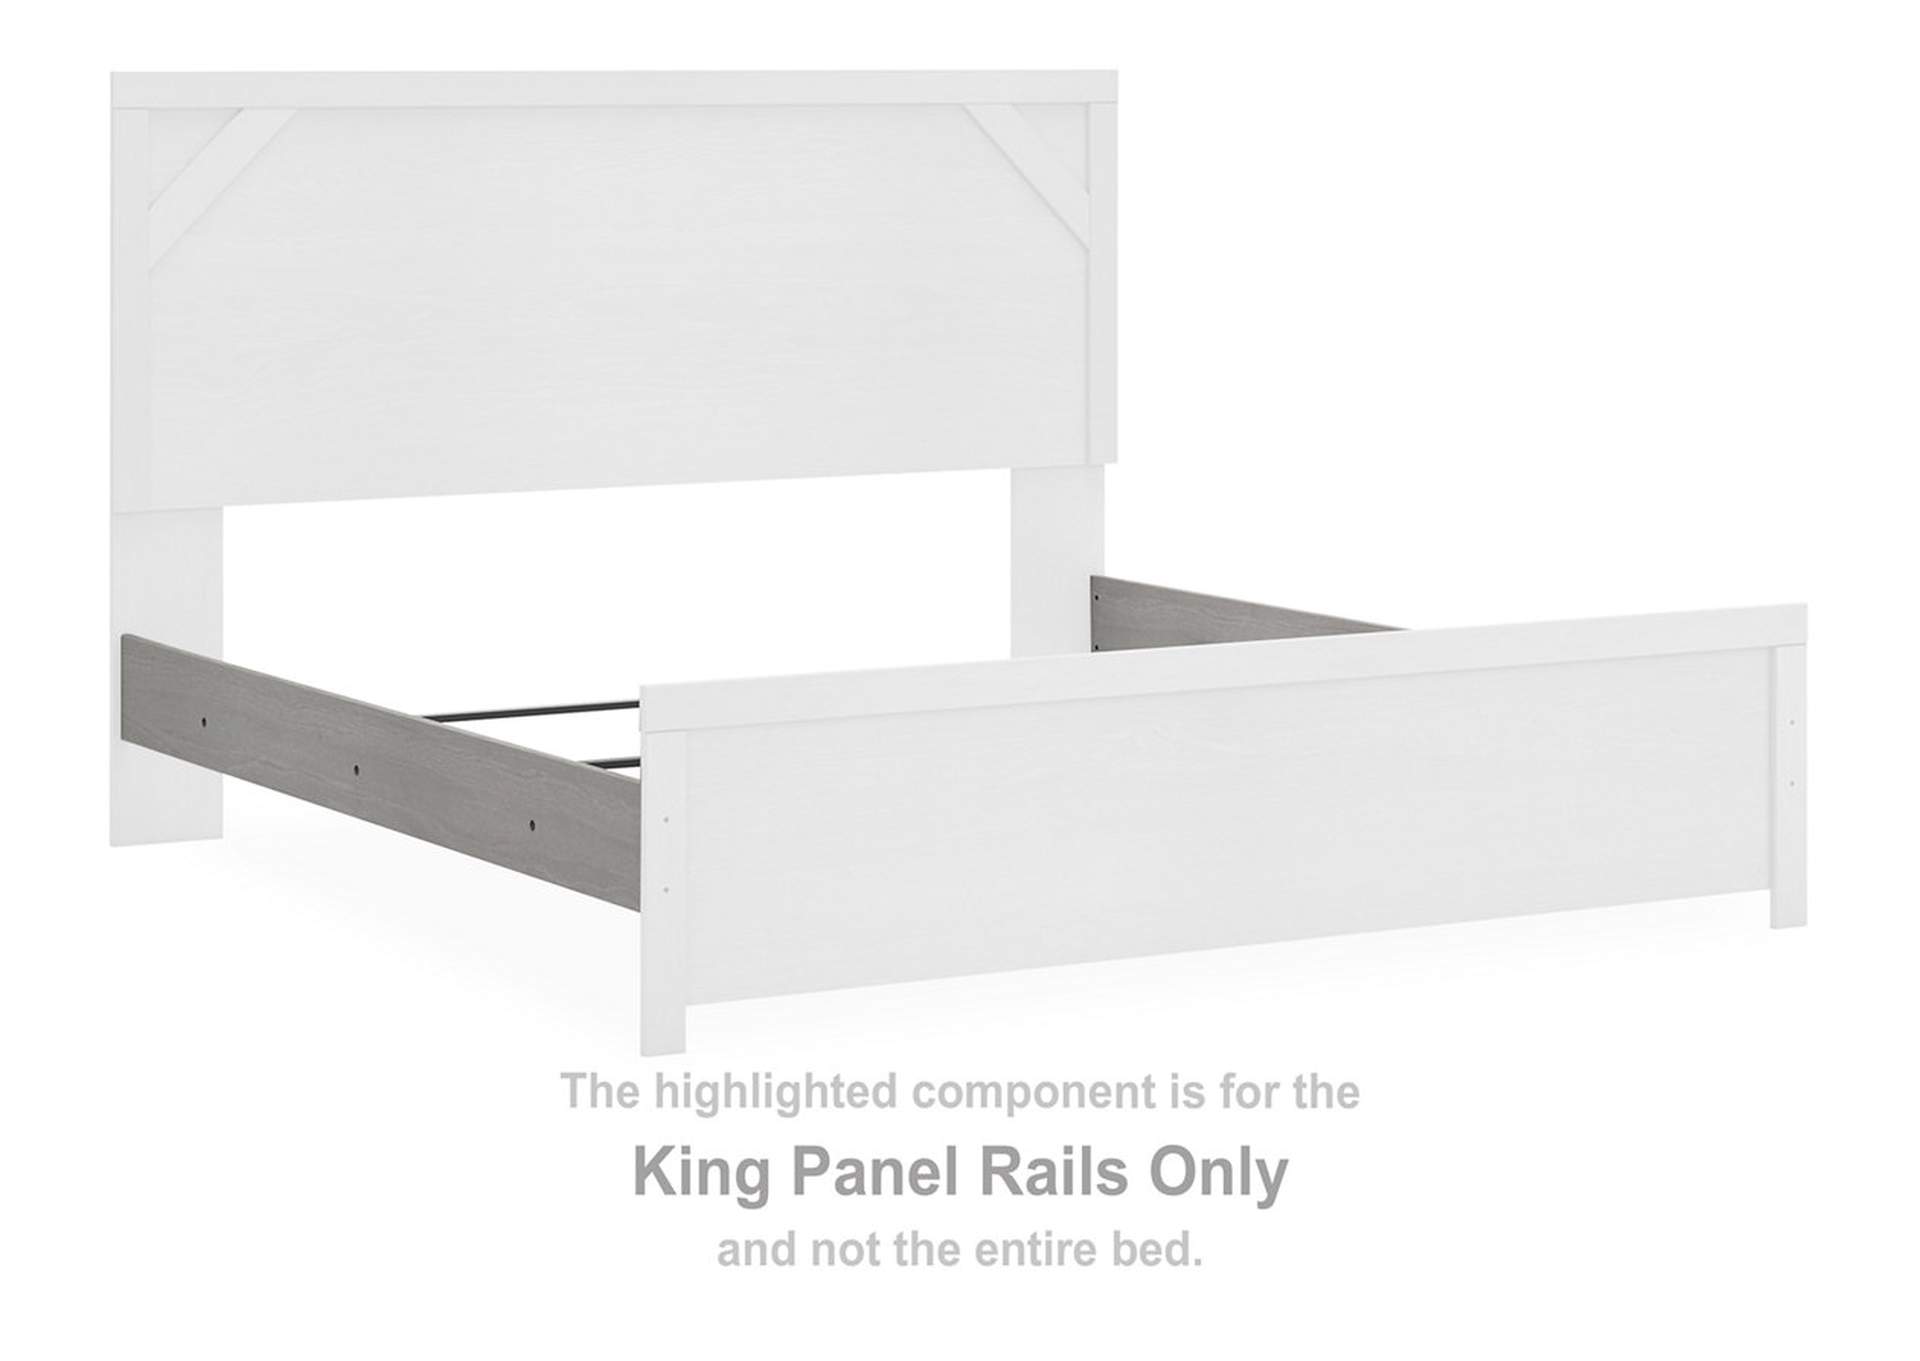 Cottonburg King Panel Bed, Dresser, Mirror and Nightstand,Signature Design By Ashley